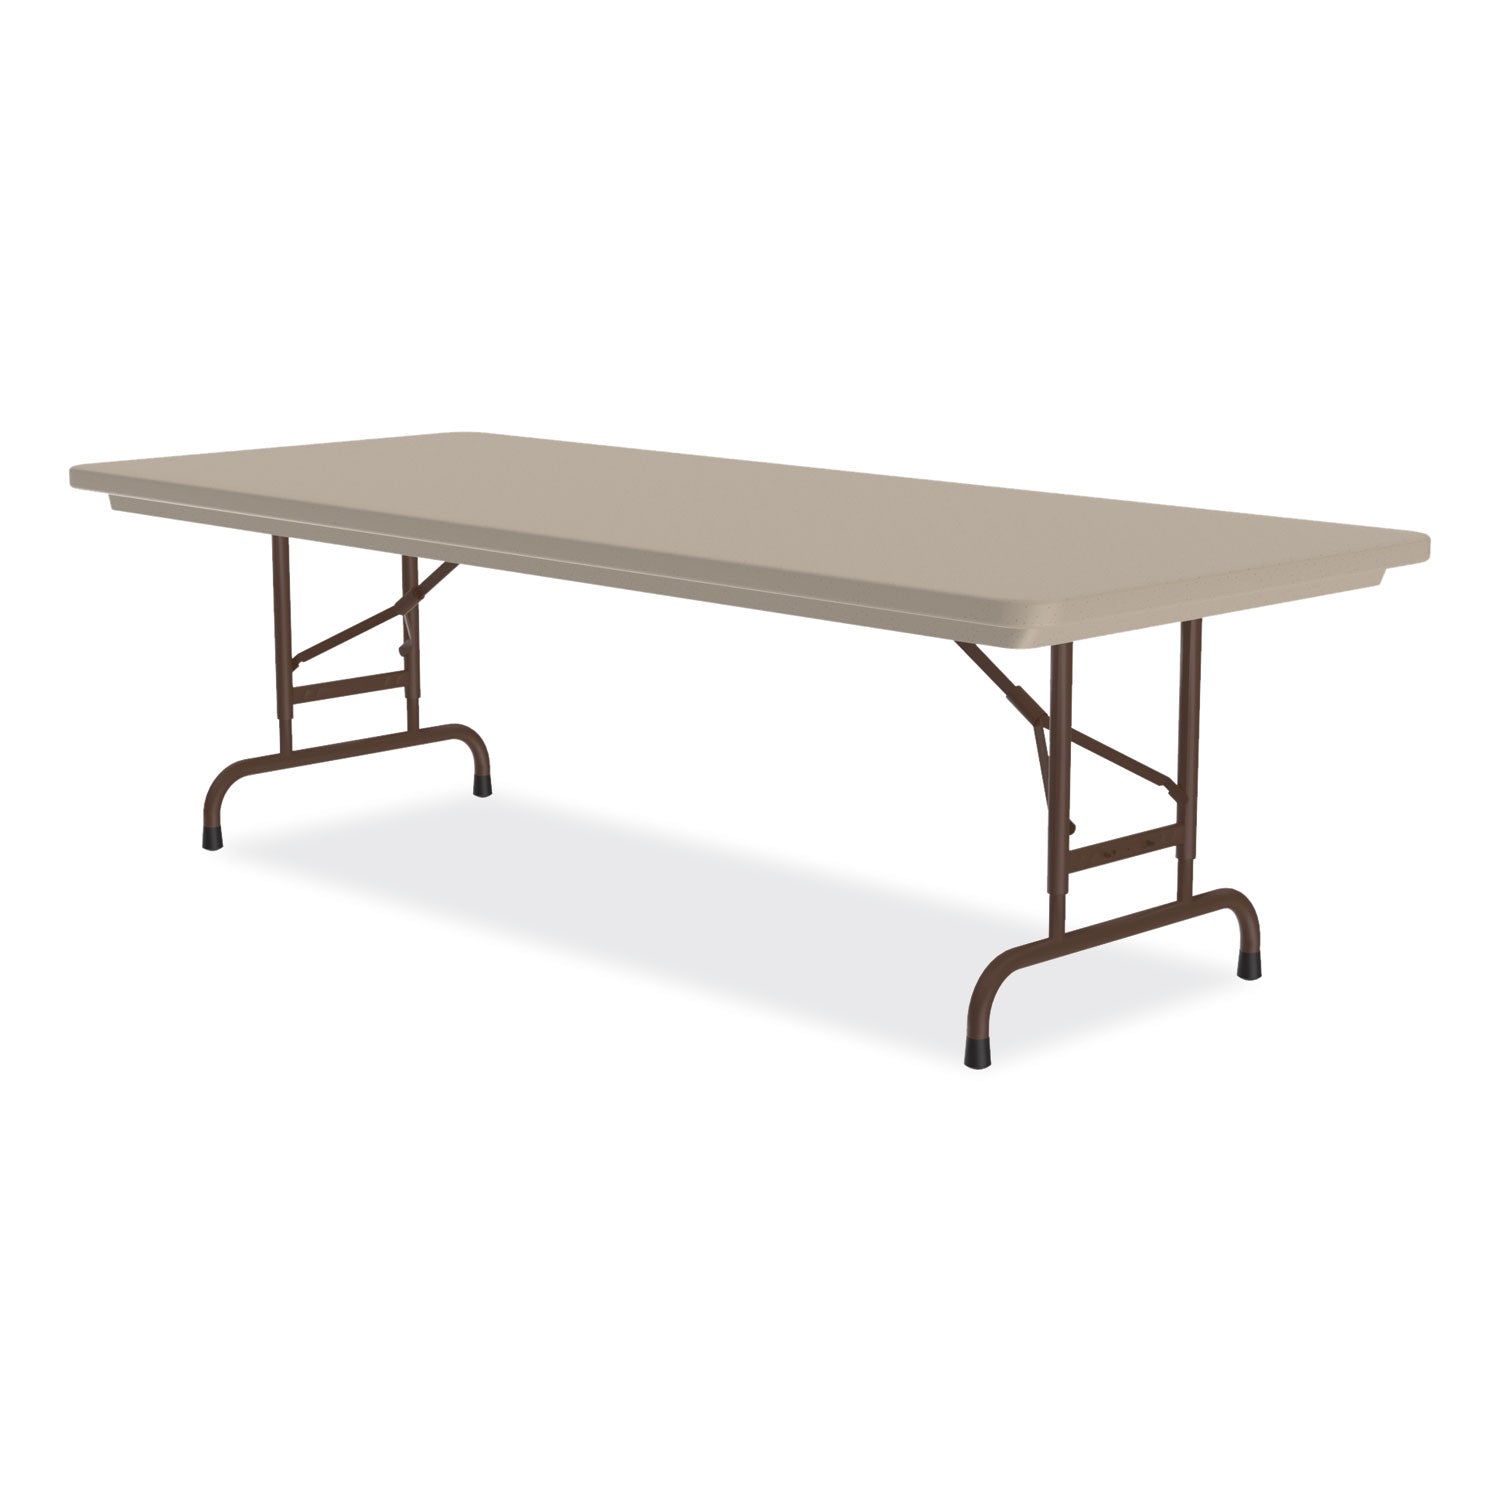 adjustable-folding-tables-rectangular-60-x-30-x-22-to-32-mocha-top-brown-legs-4-pallet-ships-in-4-6-business-days_crlra3060244p - 8